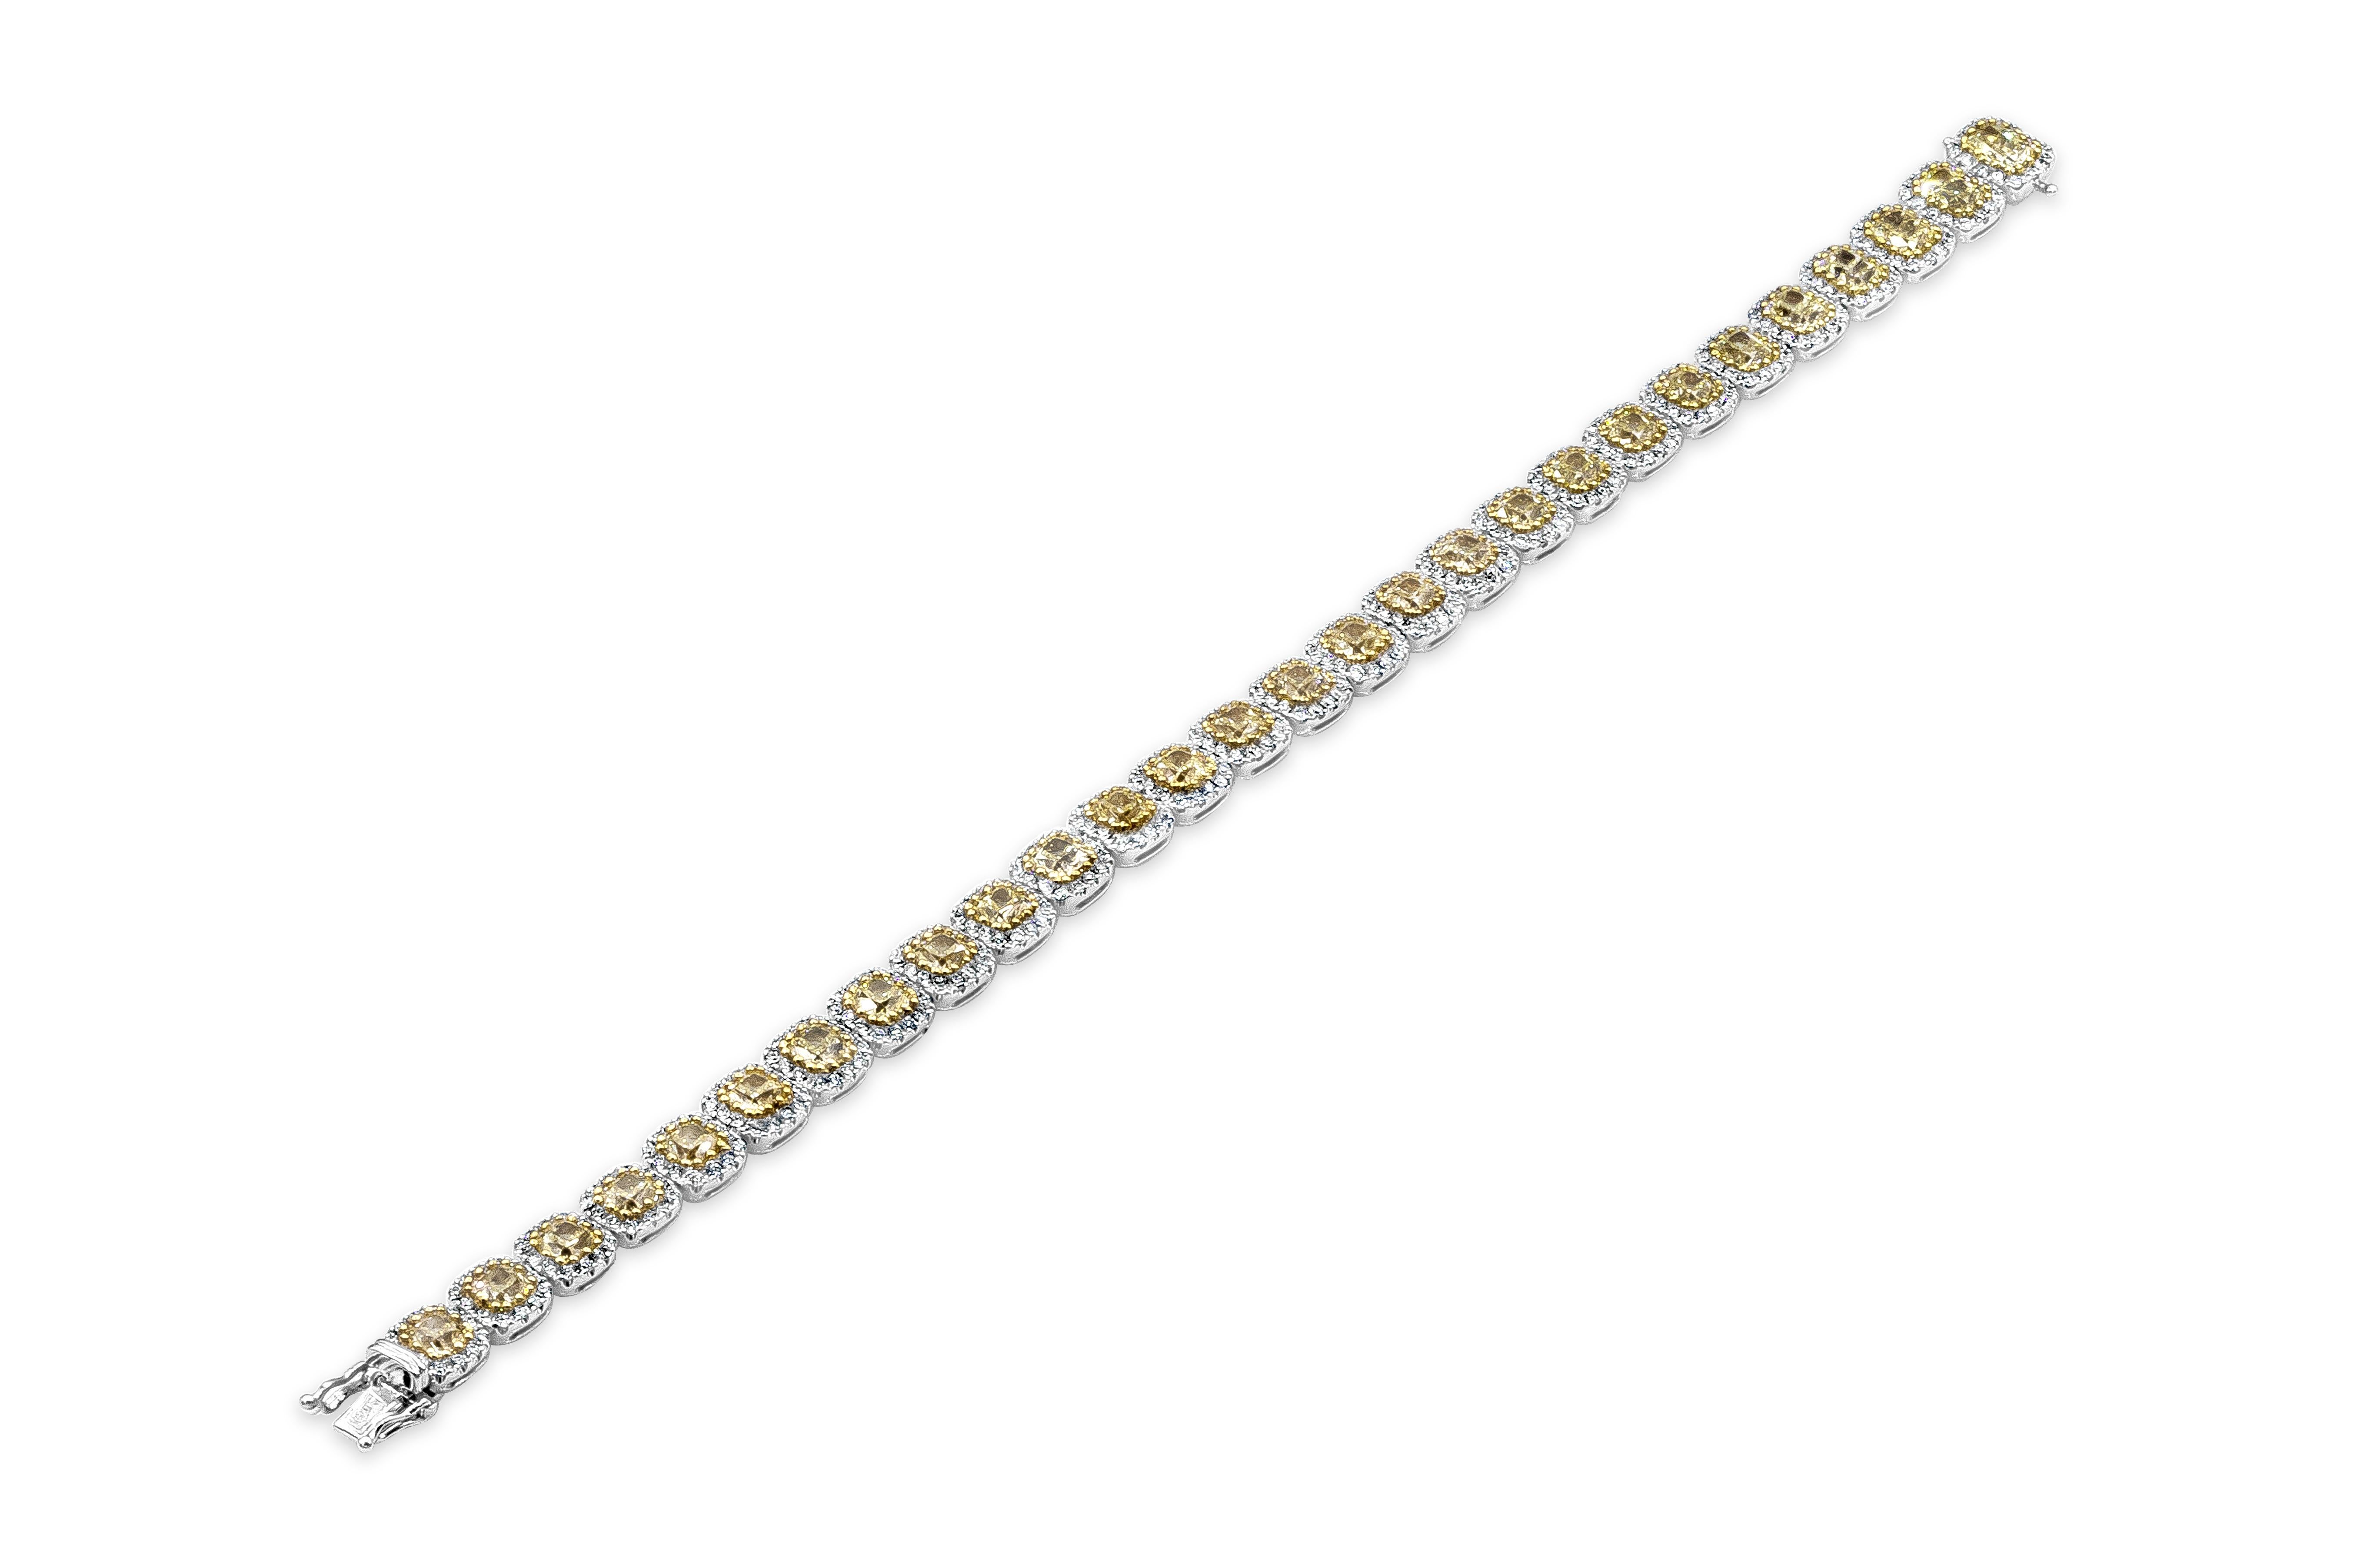 A unique and stunning piece of jewelry showcasing 9.53 carats of cushion cut yellow diamonds, set in a brilliant diamond halo. Accent diamonds weigh 2.49 carats total. Made in 18 karat white gold. 

Style available in different price ranges. Prices